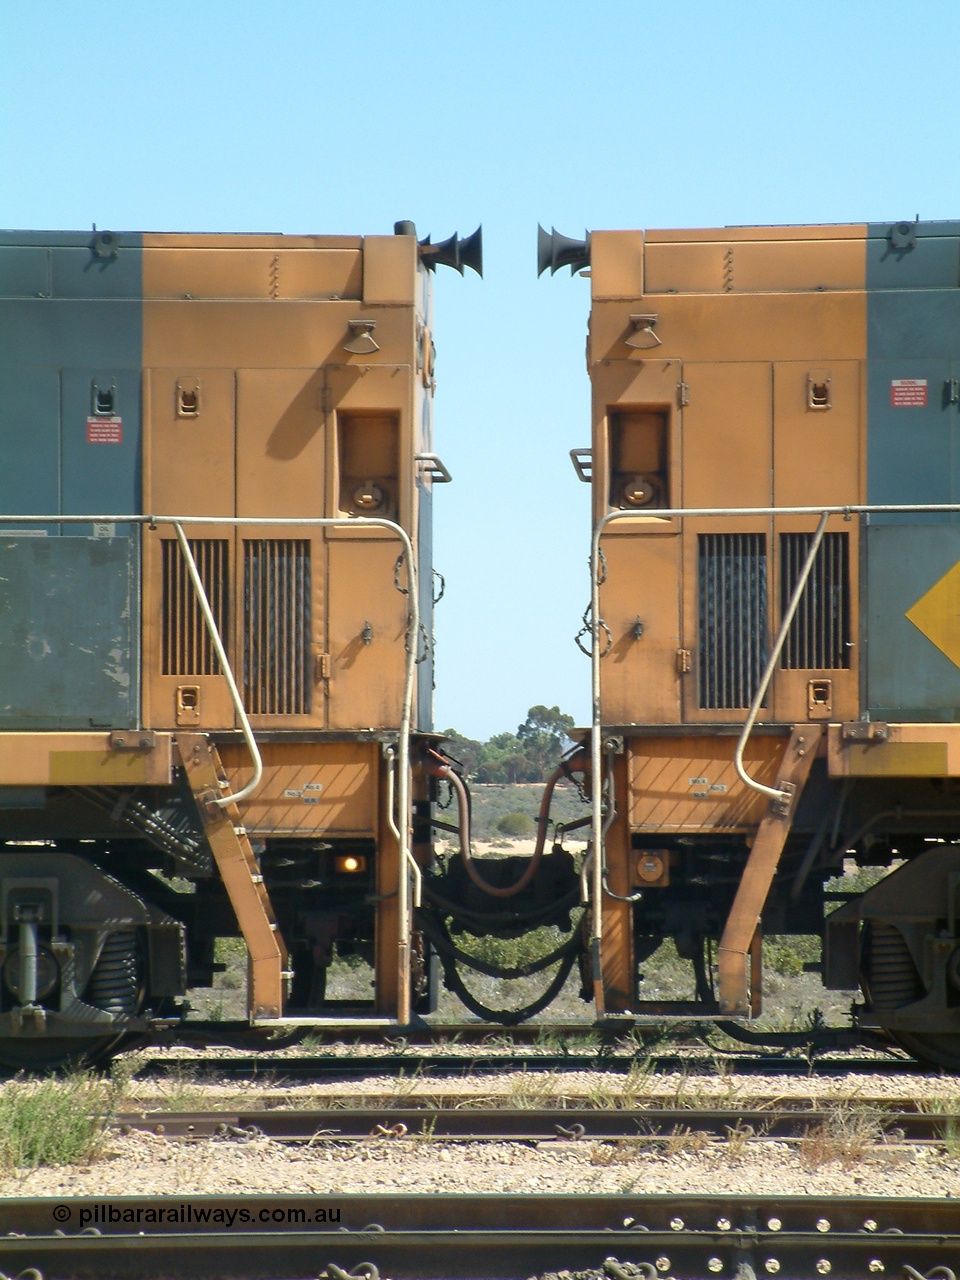 030404 125227
Port Augusta Spencer Junction yard, a pair of back to back National Rail NR class units built by Goninan as GE Cv40-9i models showing the coupling between two unit, NR 50 serial 7250-08 / 97-252 is on the right. 4th April 2003.
Keywords: NR-class;NR50;7250-08/97-252;Goninan;GE;Cv40-9i;